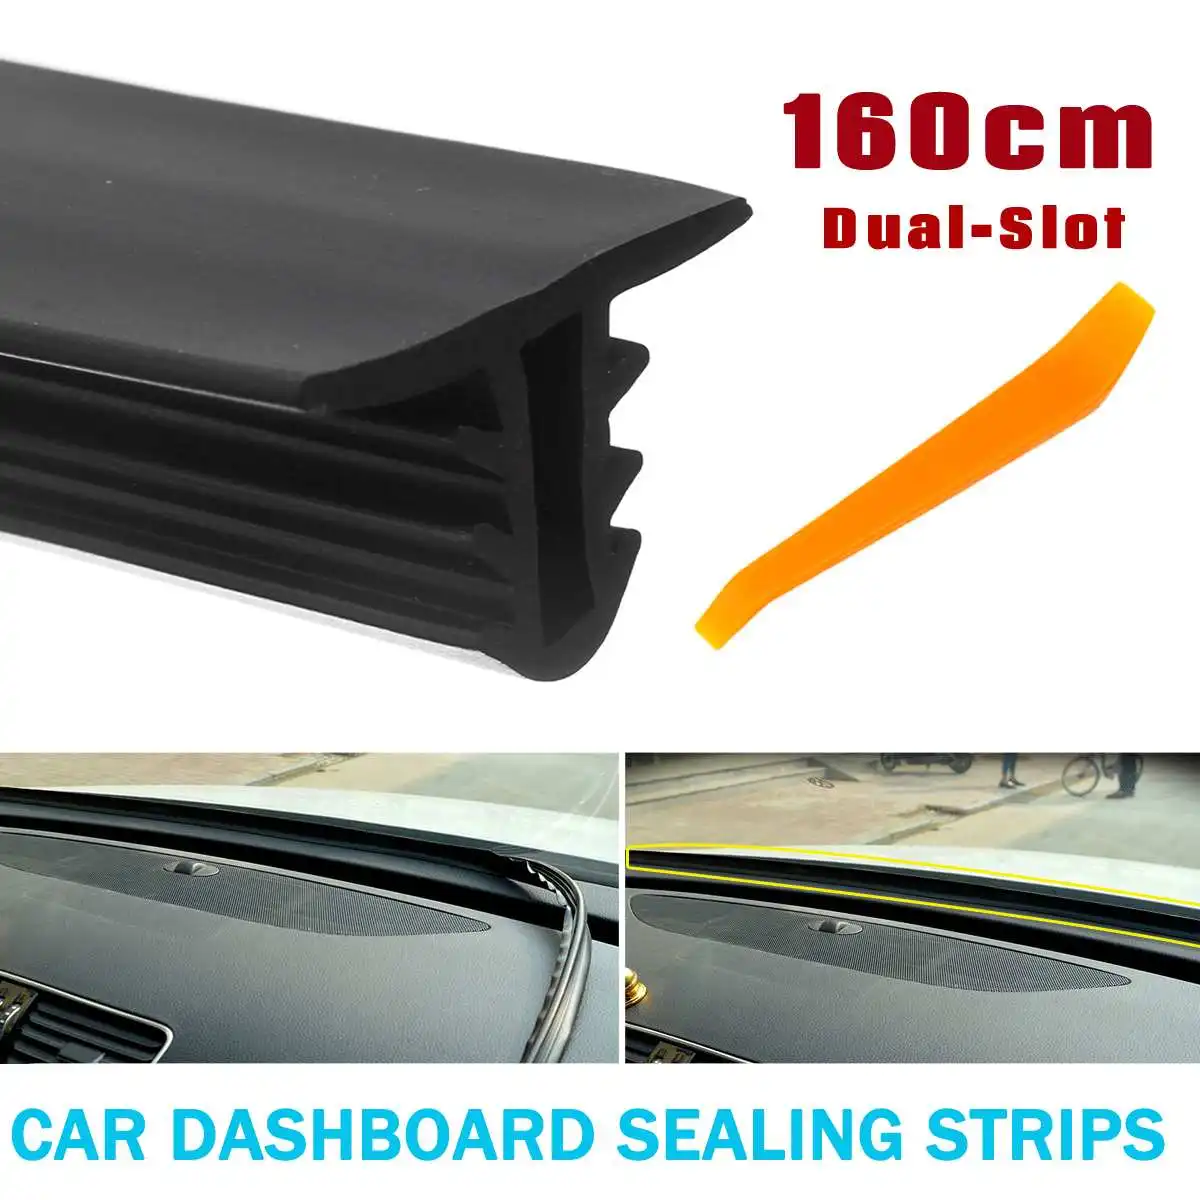 1.6m Soundproof Dustproof Sealing Strip for Auto Car Dashboard Windshield+tools